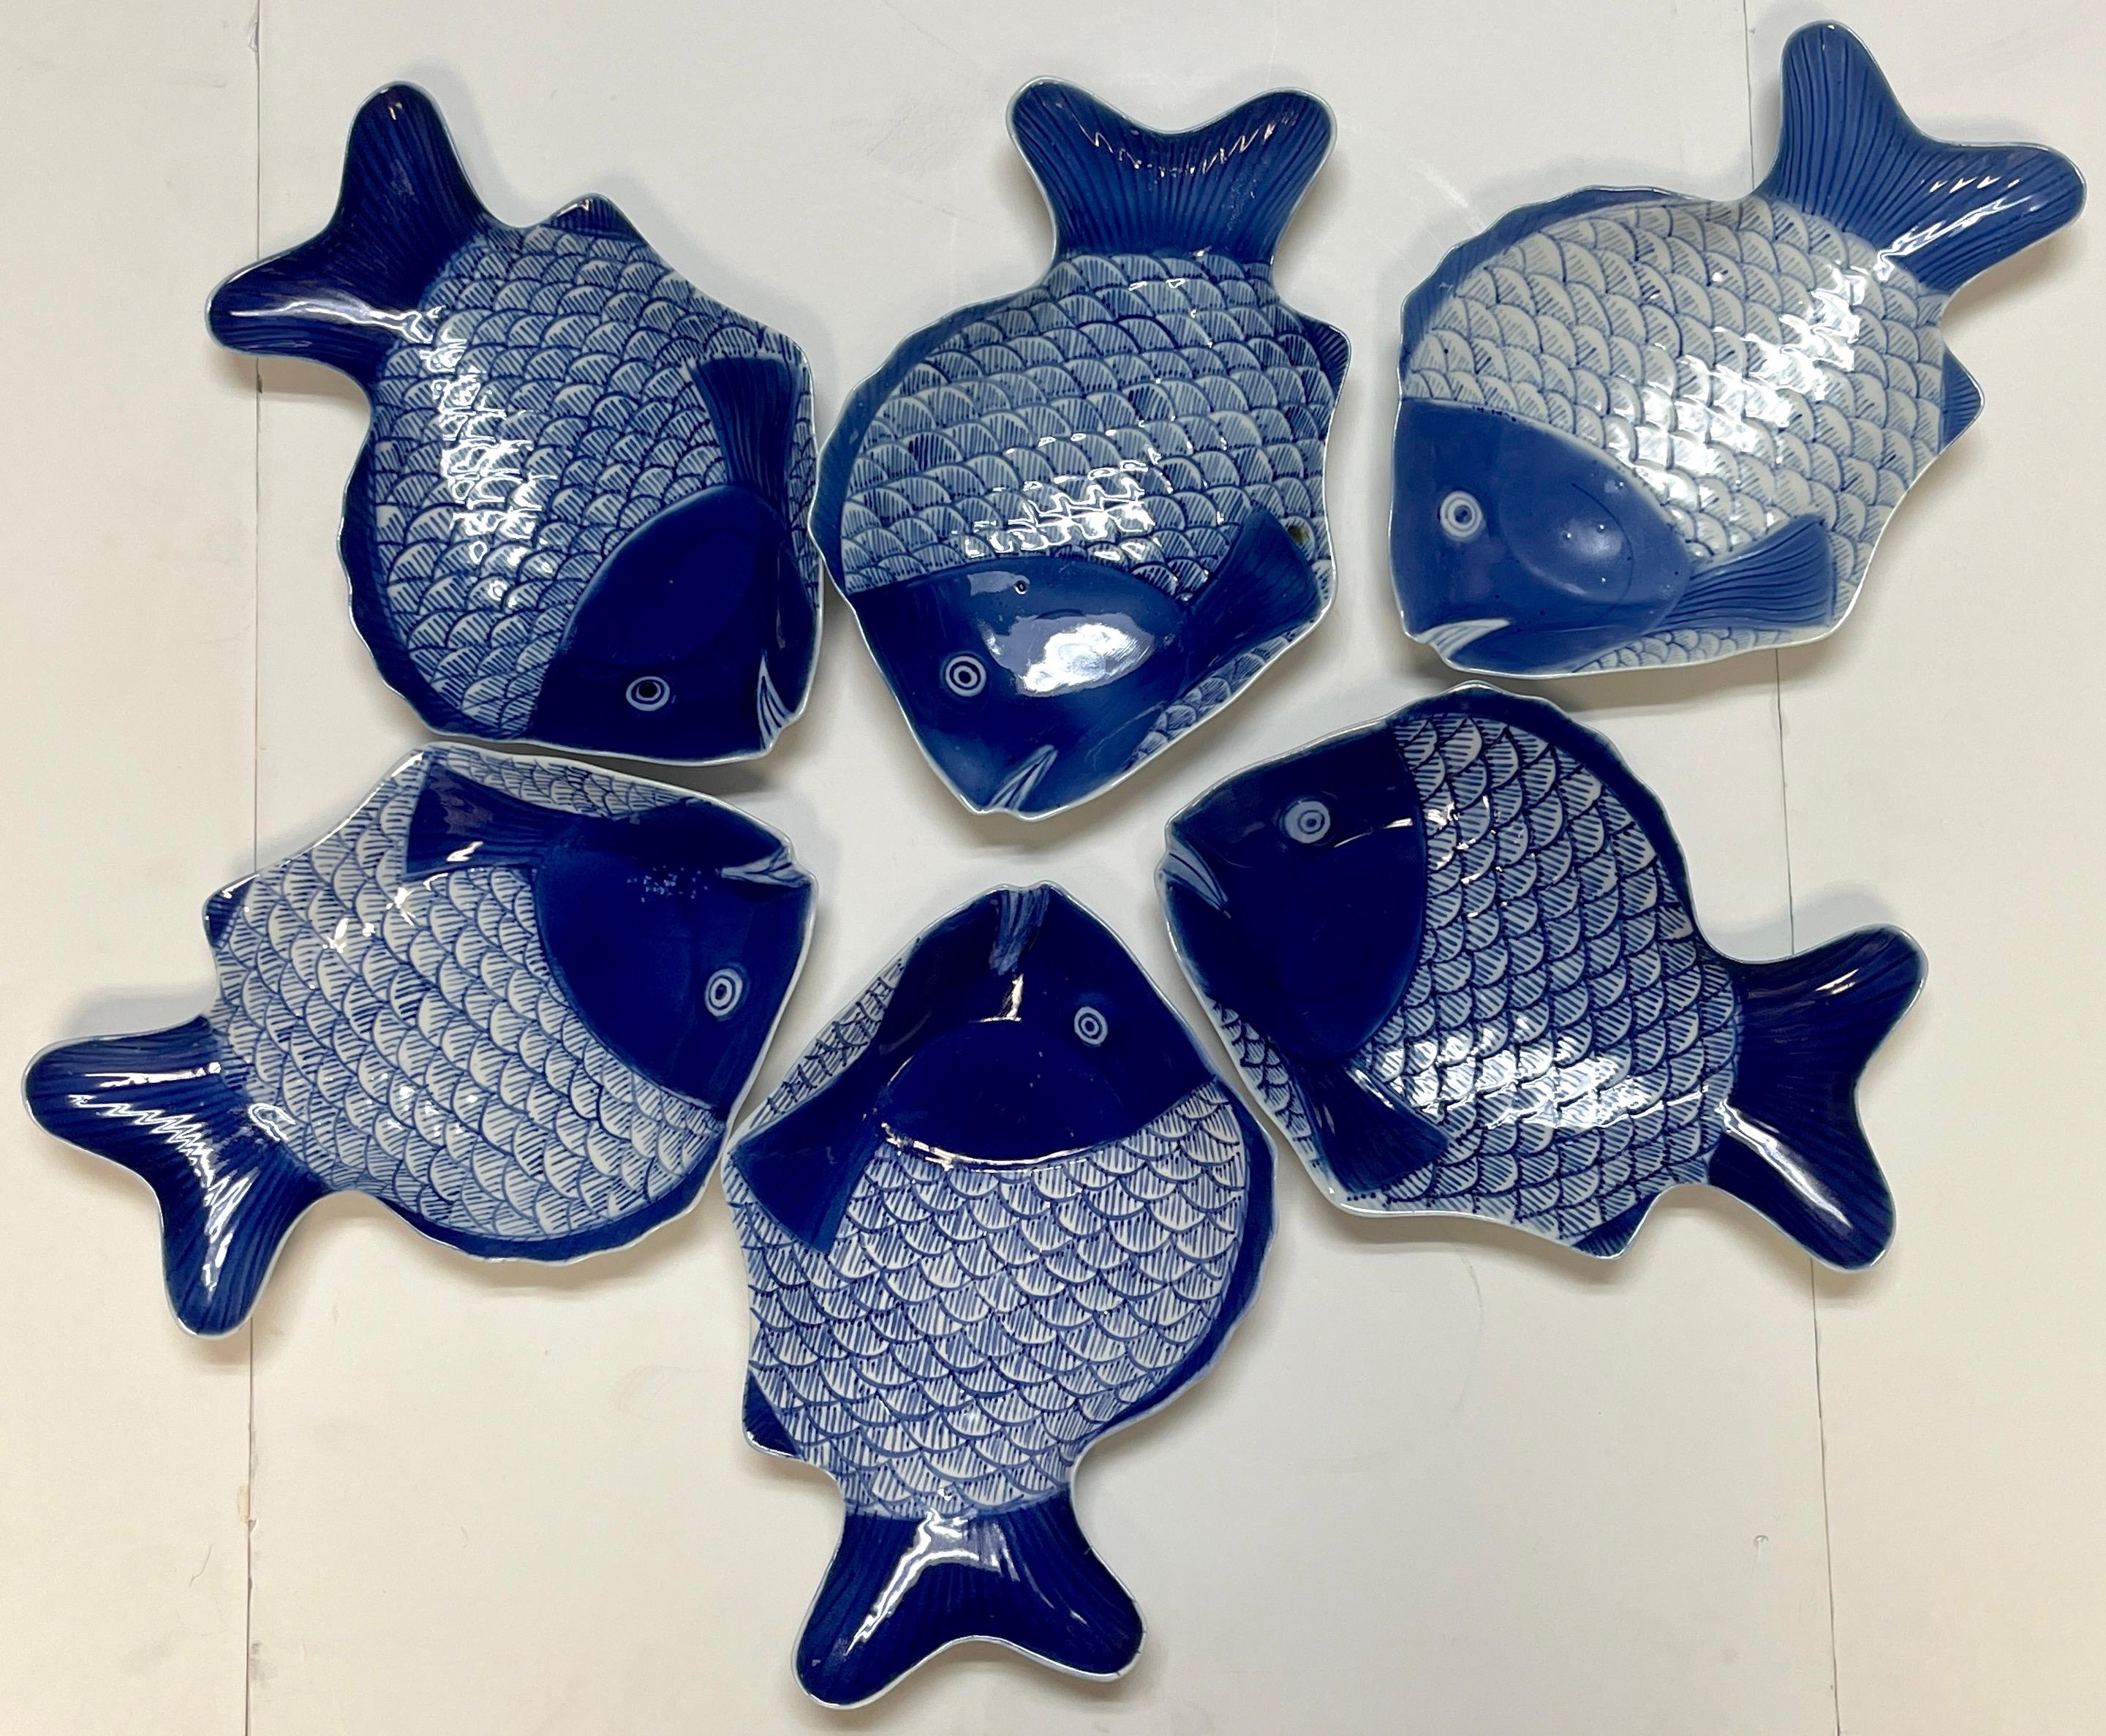 Set of Six Large Fukagawa Blue & White Fish Plates
Each one hand painted and enameled, one in a lighter hue of blue.